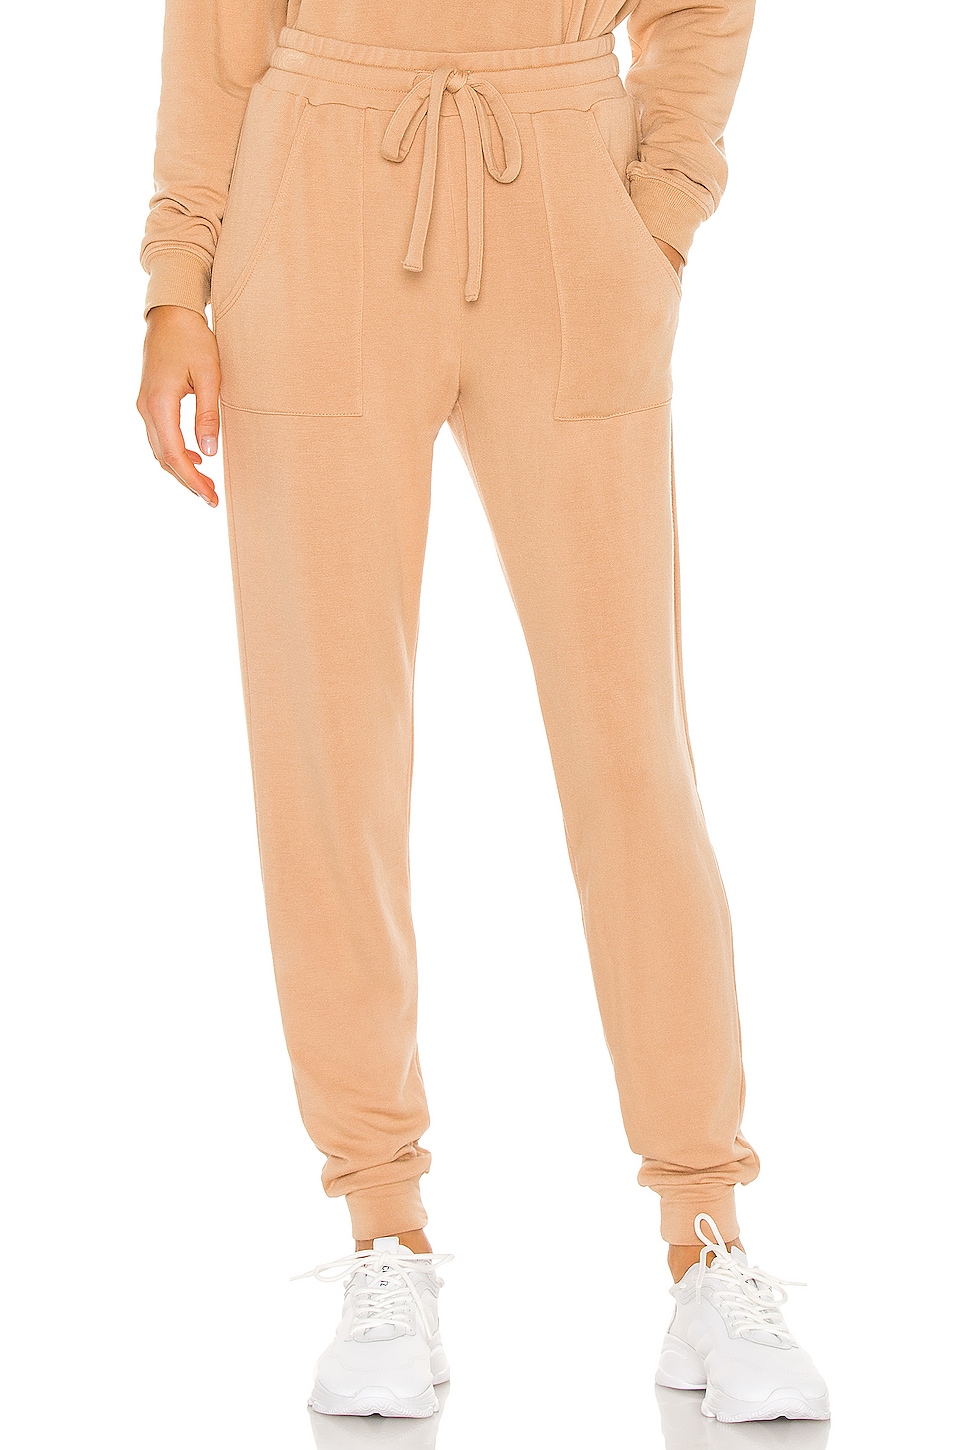 YEAR OF OURS Jogger Sweatpant Tan